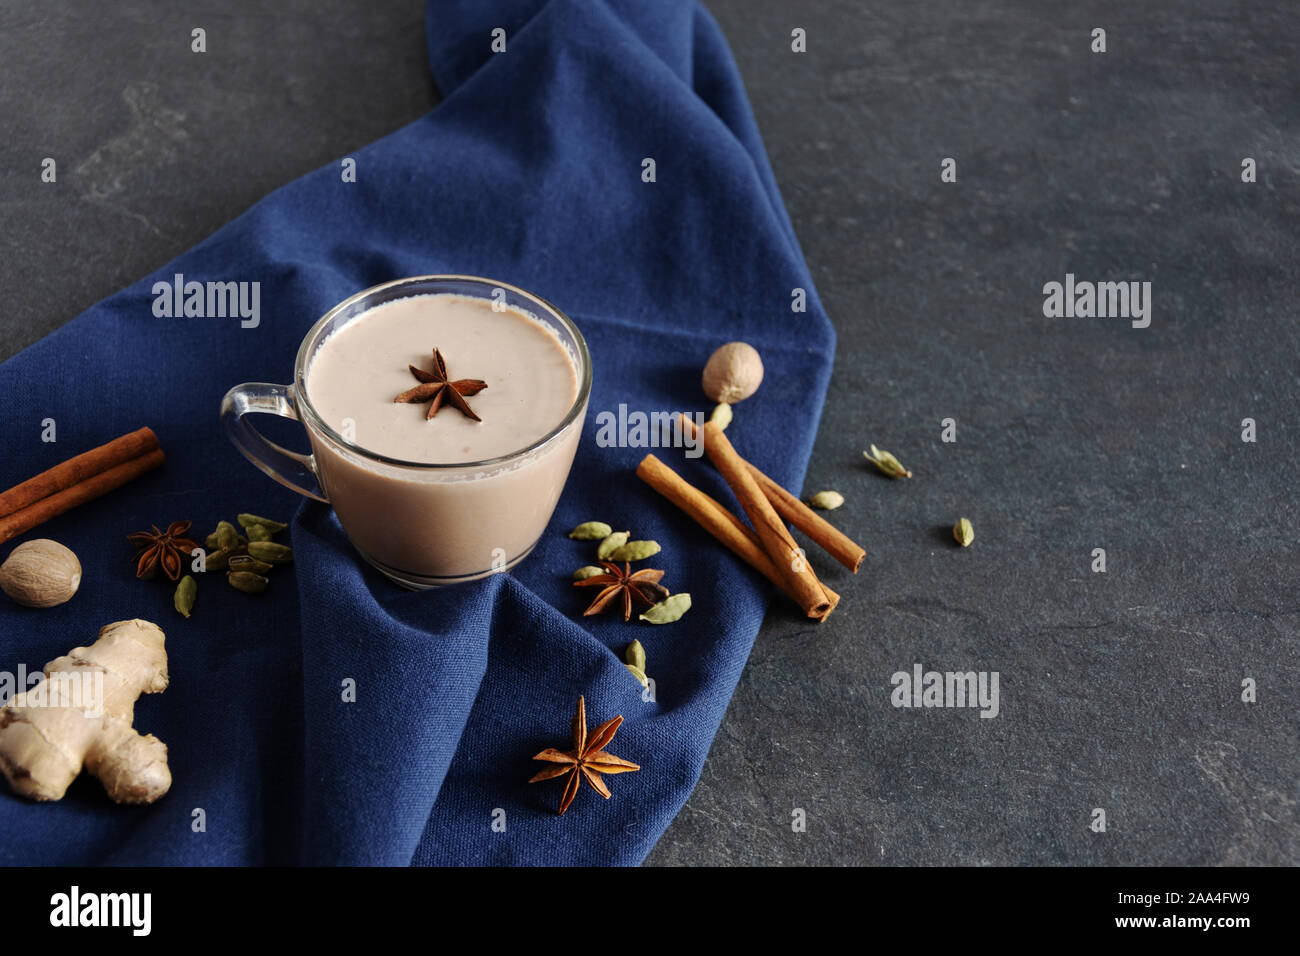 Masala chai made by brewing black tea with aromatic spices and herbs, such as Cinnamon Stick, Thai Cardamom, Ginger, Star Anise, Black Peppercorns, Nu Stock Photo